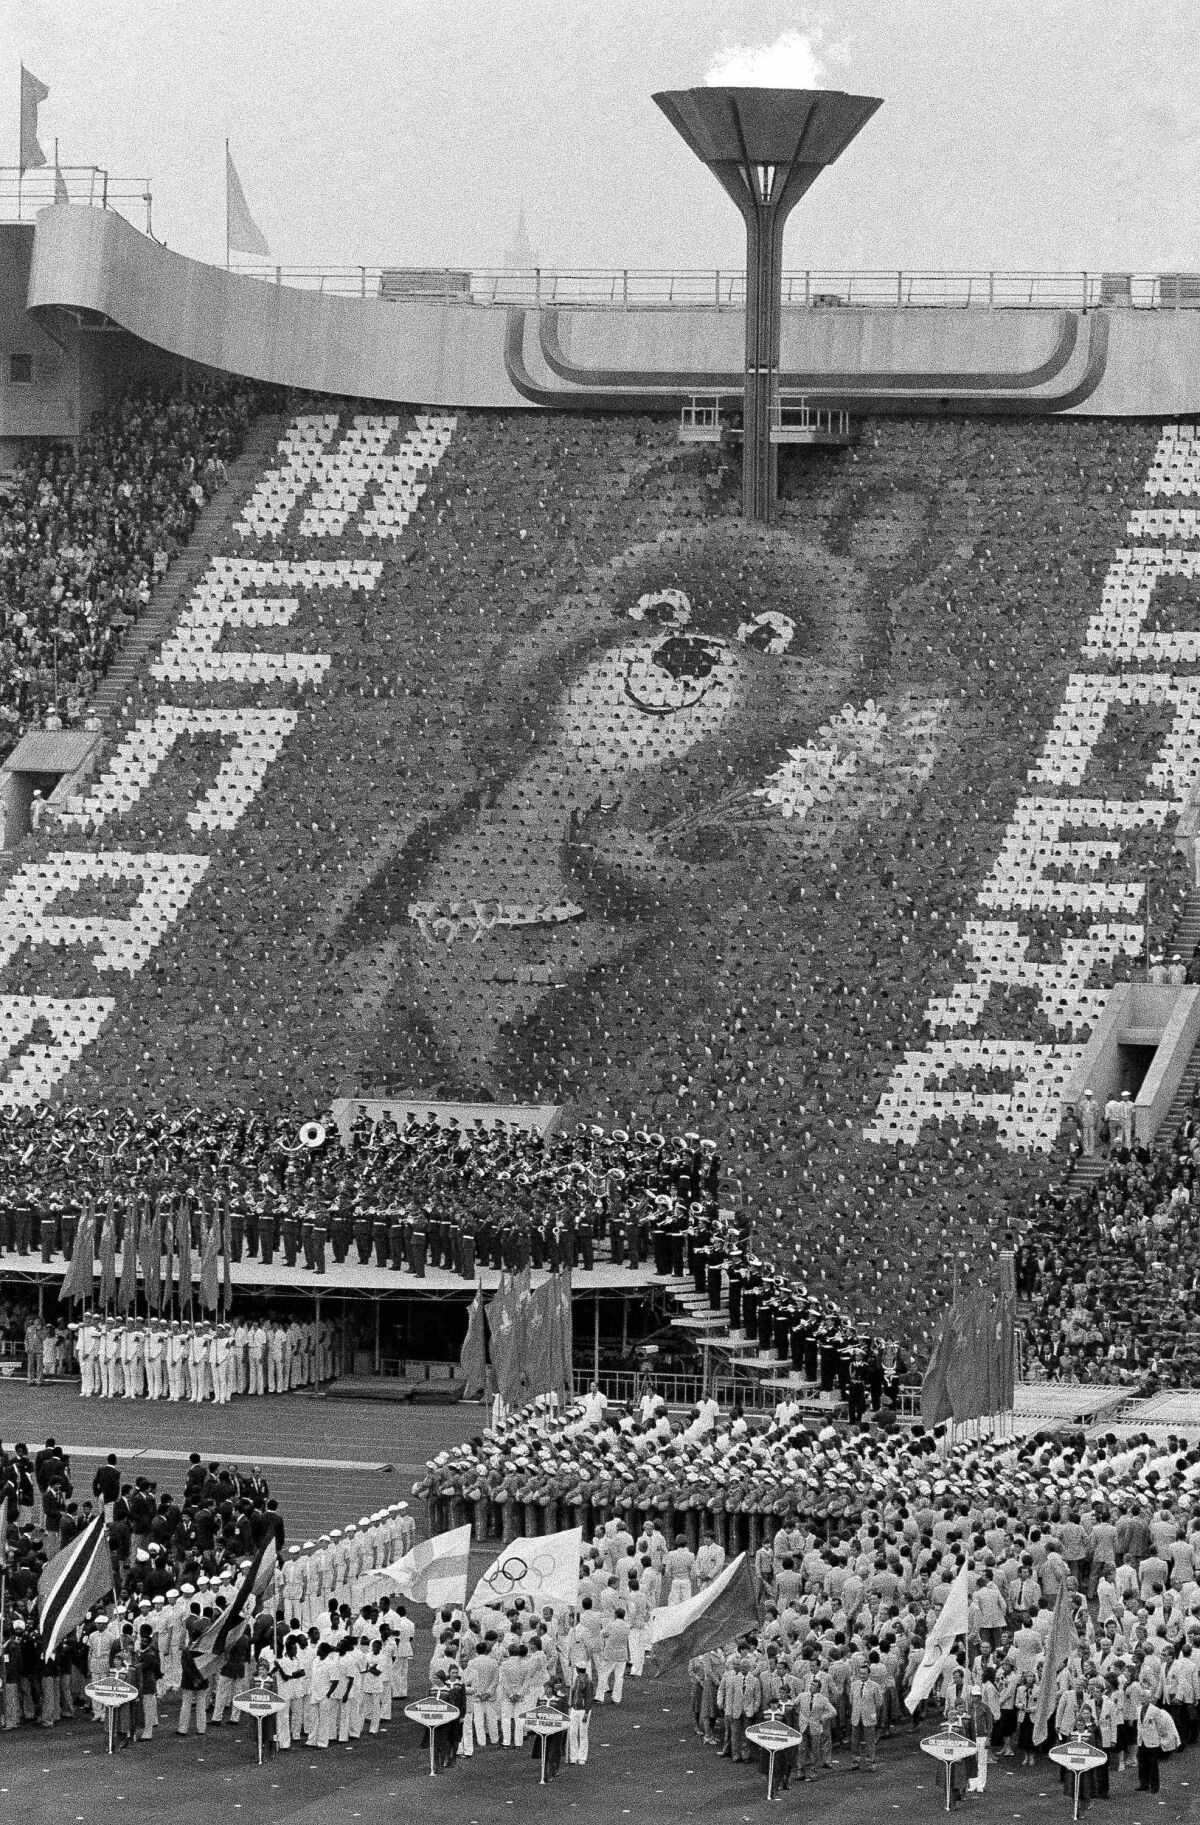 FILE - In this July 19, 1980, file photo, a giant image of Misha, the Russian bear mascot of the 1980 Moscow Summer Olympic Games, greets athletes standing on the field of Moscow's Lenin Stadium during opening ceremonies of the competitions in Moscow. The image was created by 3,500 card-bearers. Overhead burns the Olympic flame. (AP Photo/File)